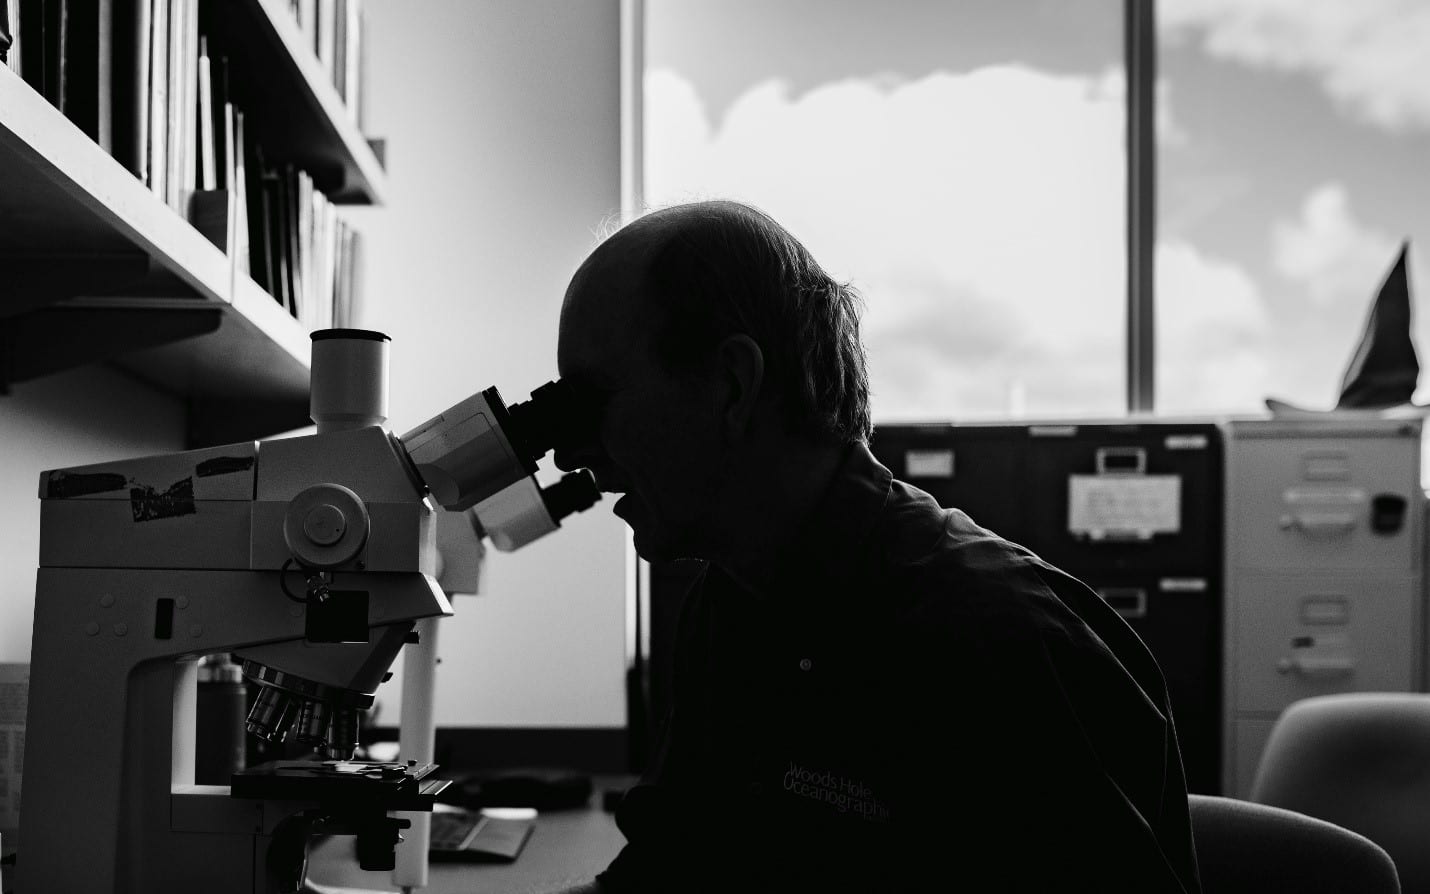 Biologist Michael Moore, director of the Marine Mammal Center at WHOI, sits at the microscope he has used for more than 30 years. (Photo by Daniel Hentz, WHOI)